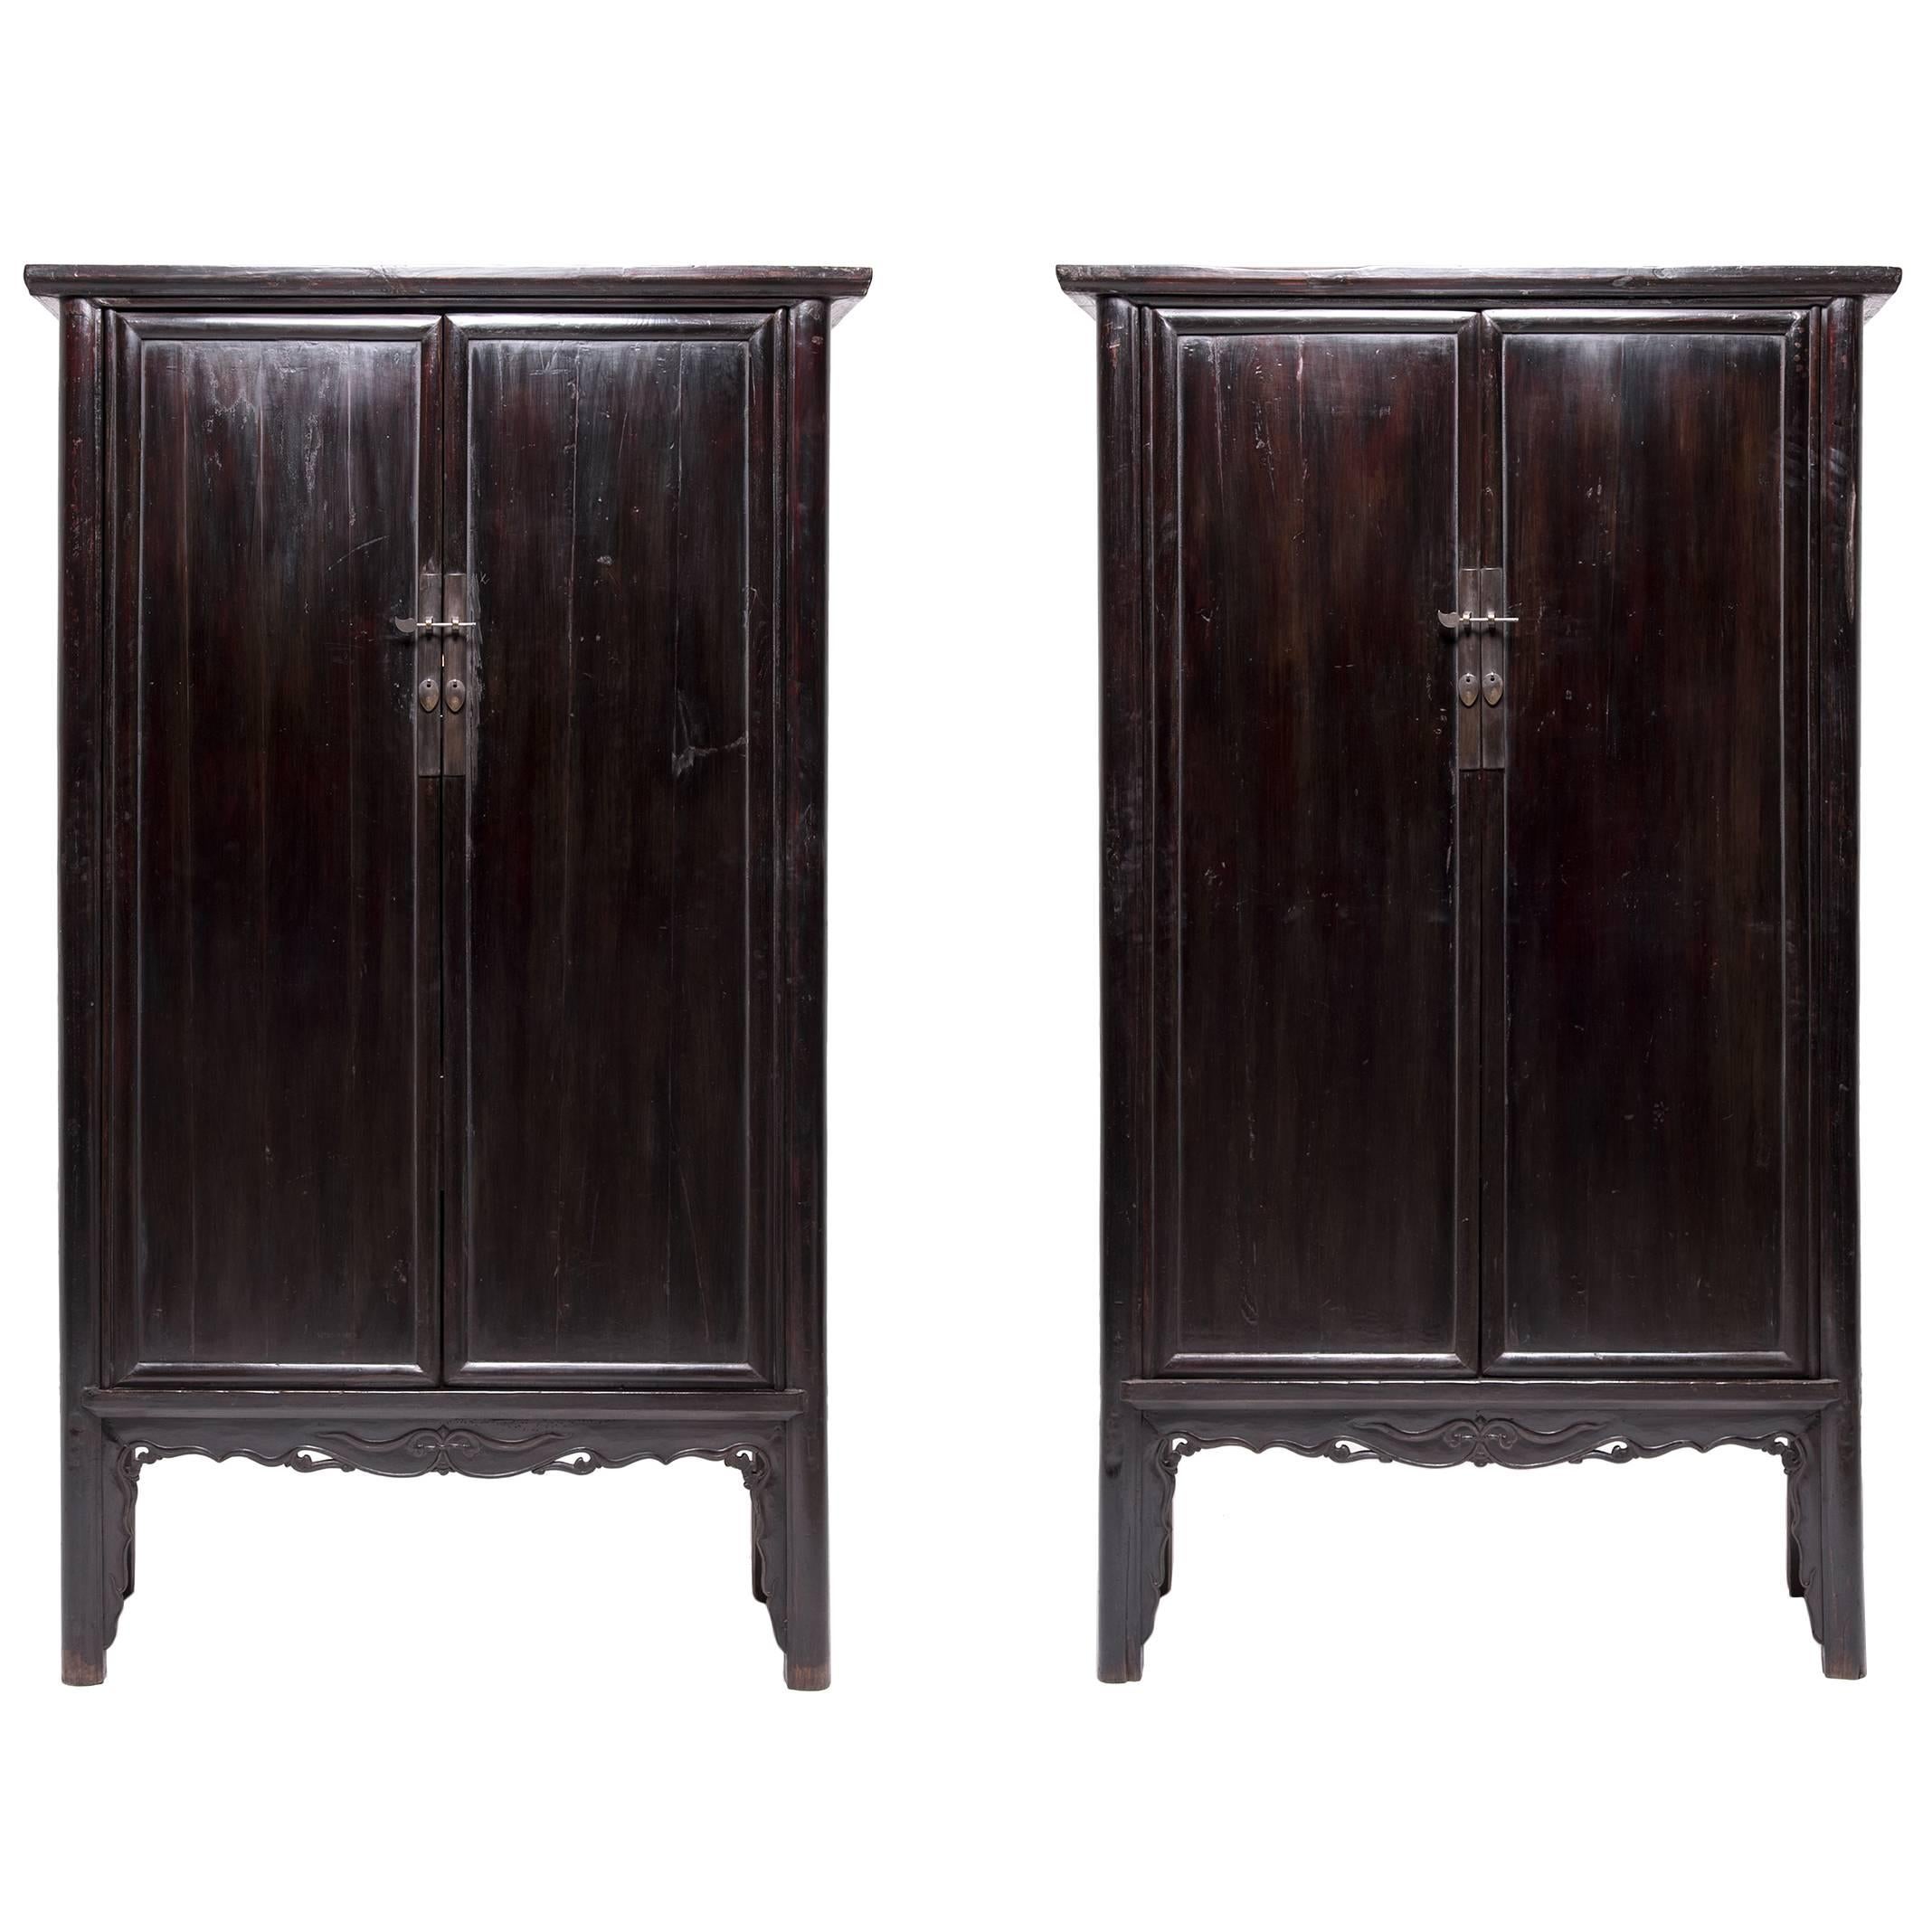 Pair of 19th Century Chinese Cusped Apron Scholars' Cabinets